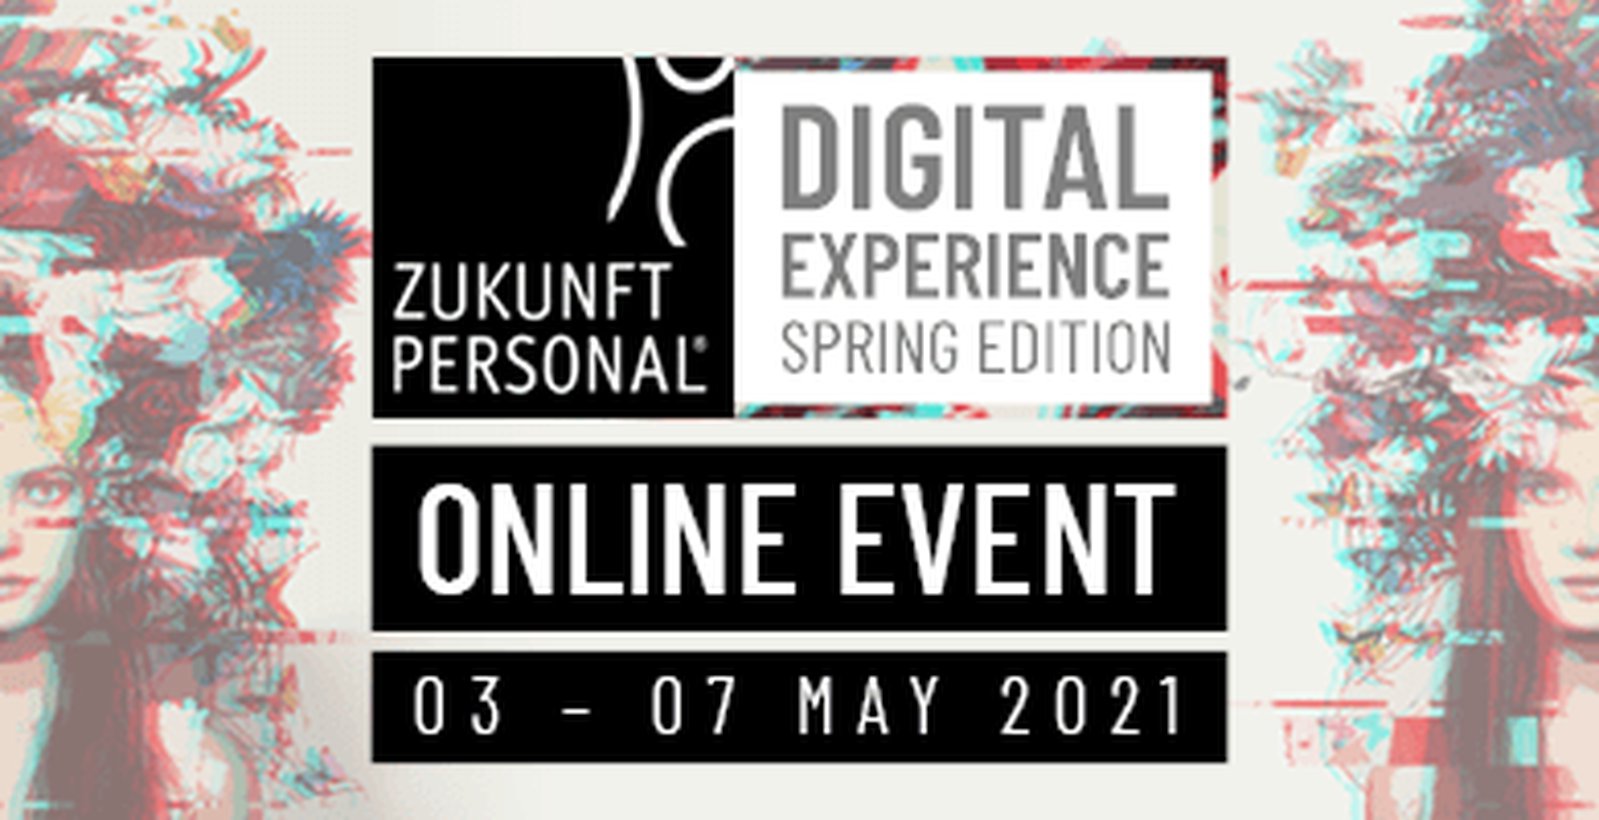 ZP Digital Experience spring edition